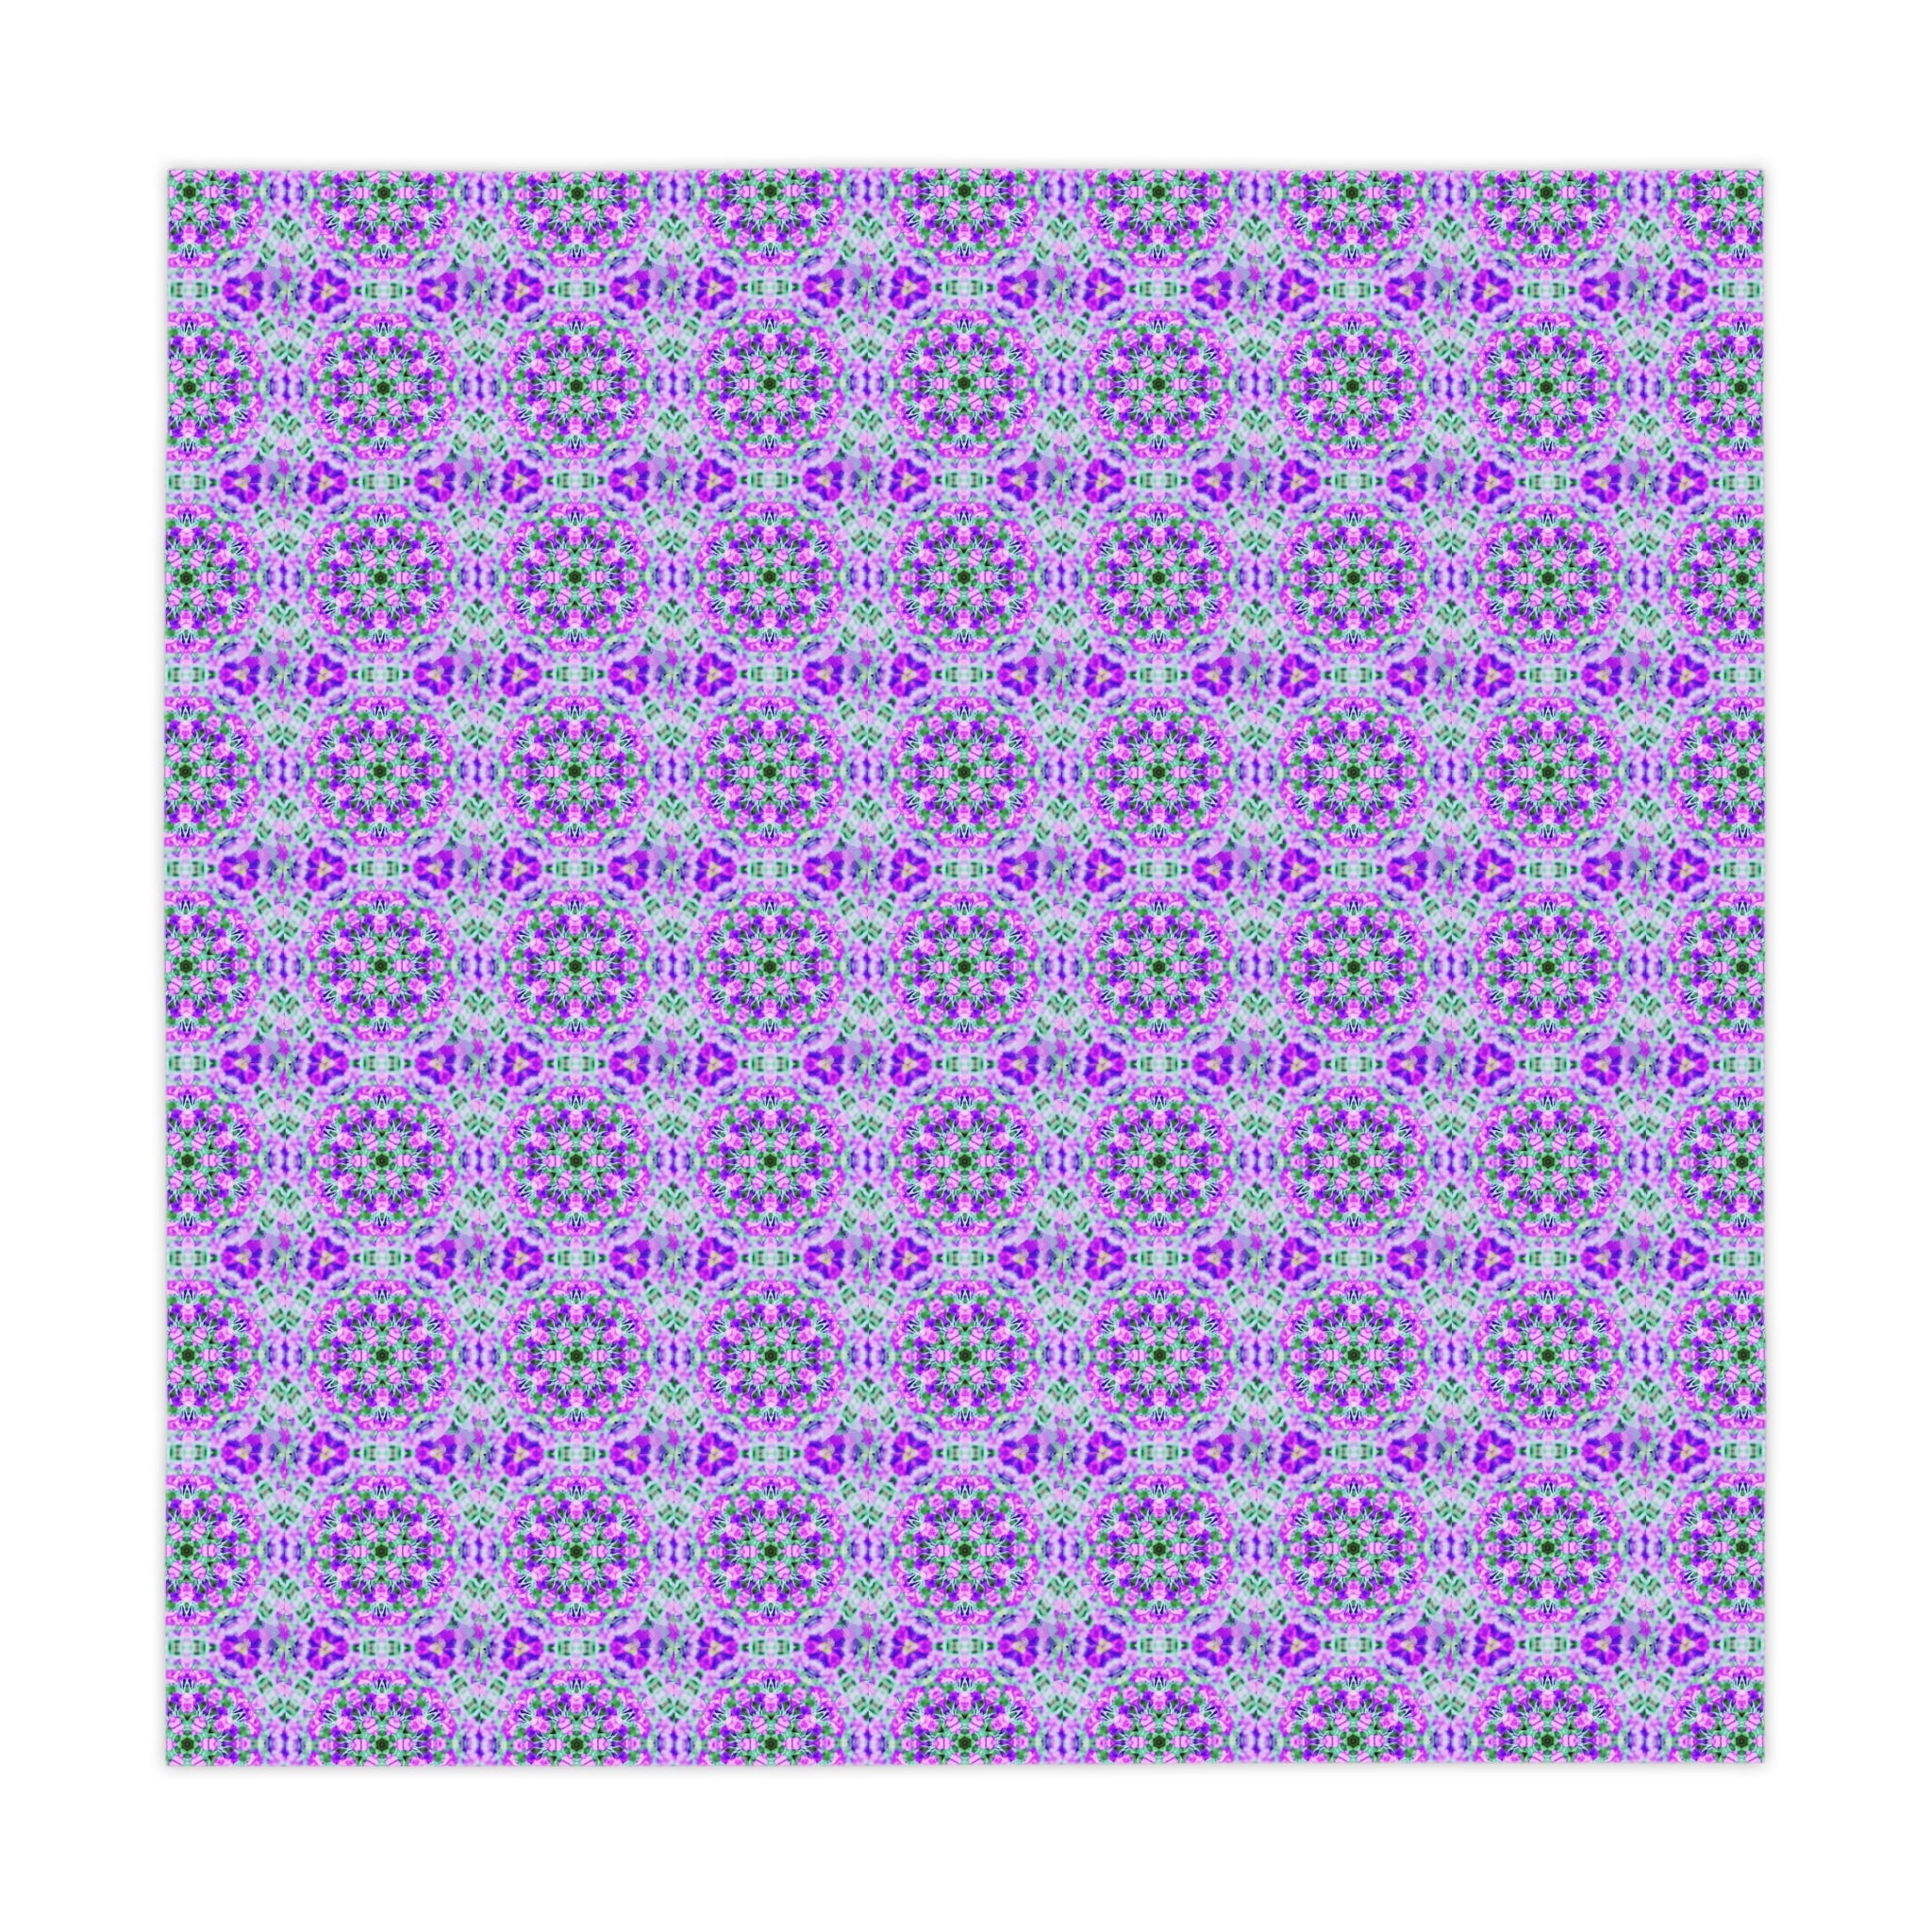 Purple and Lavender Flower Pattern Tablecloth - Shell Design Boutique